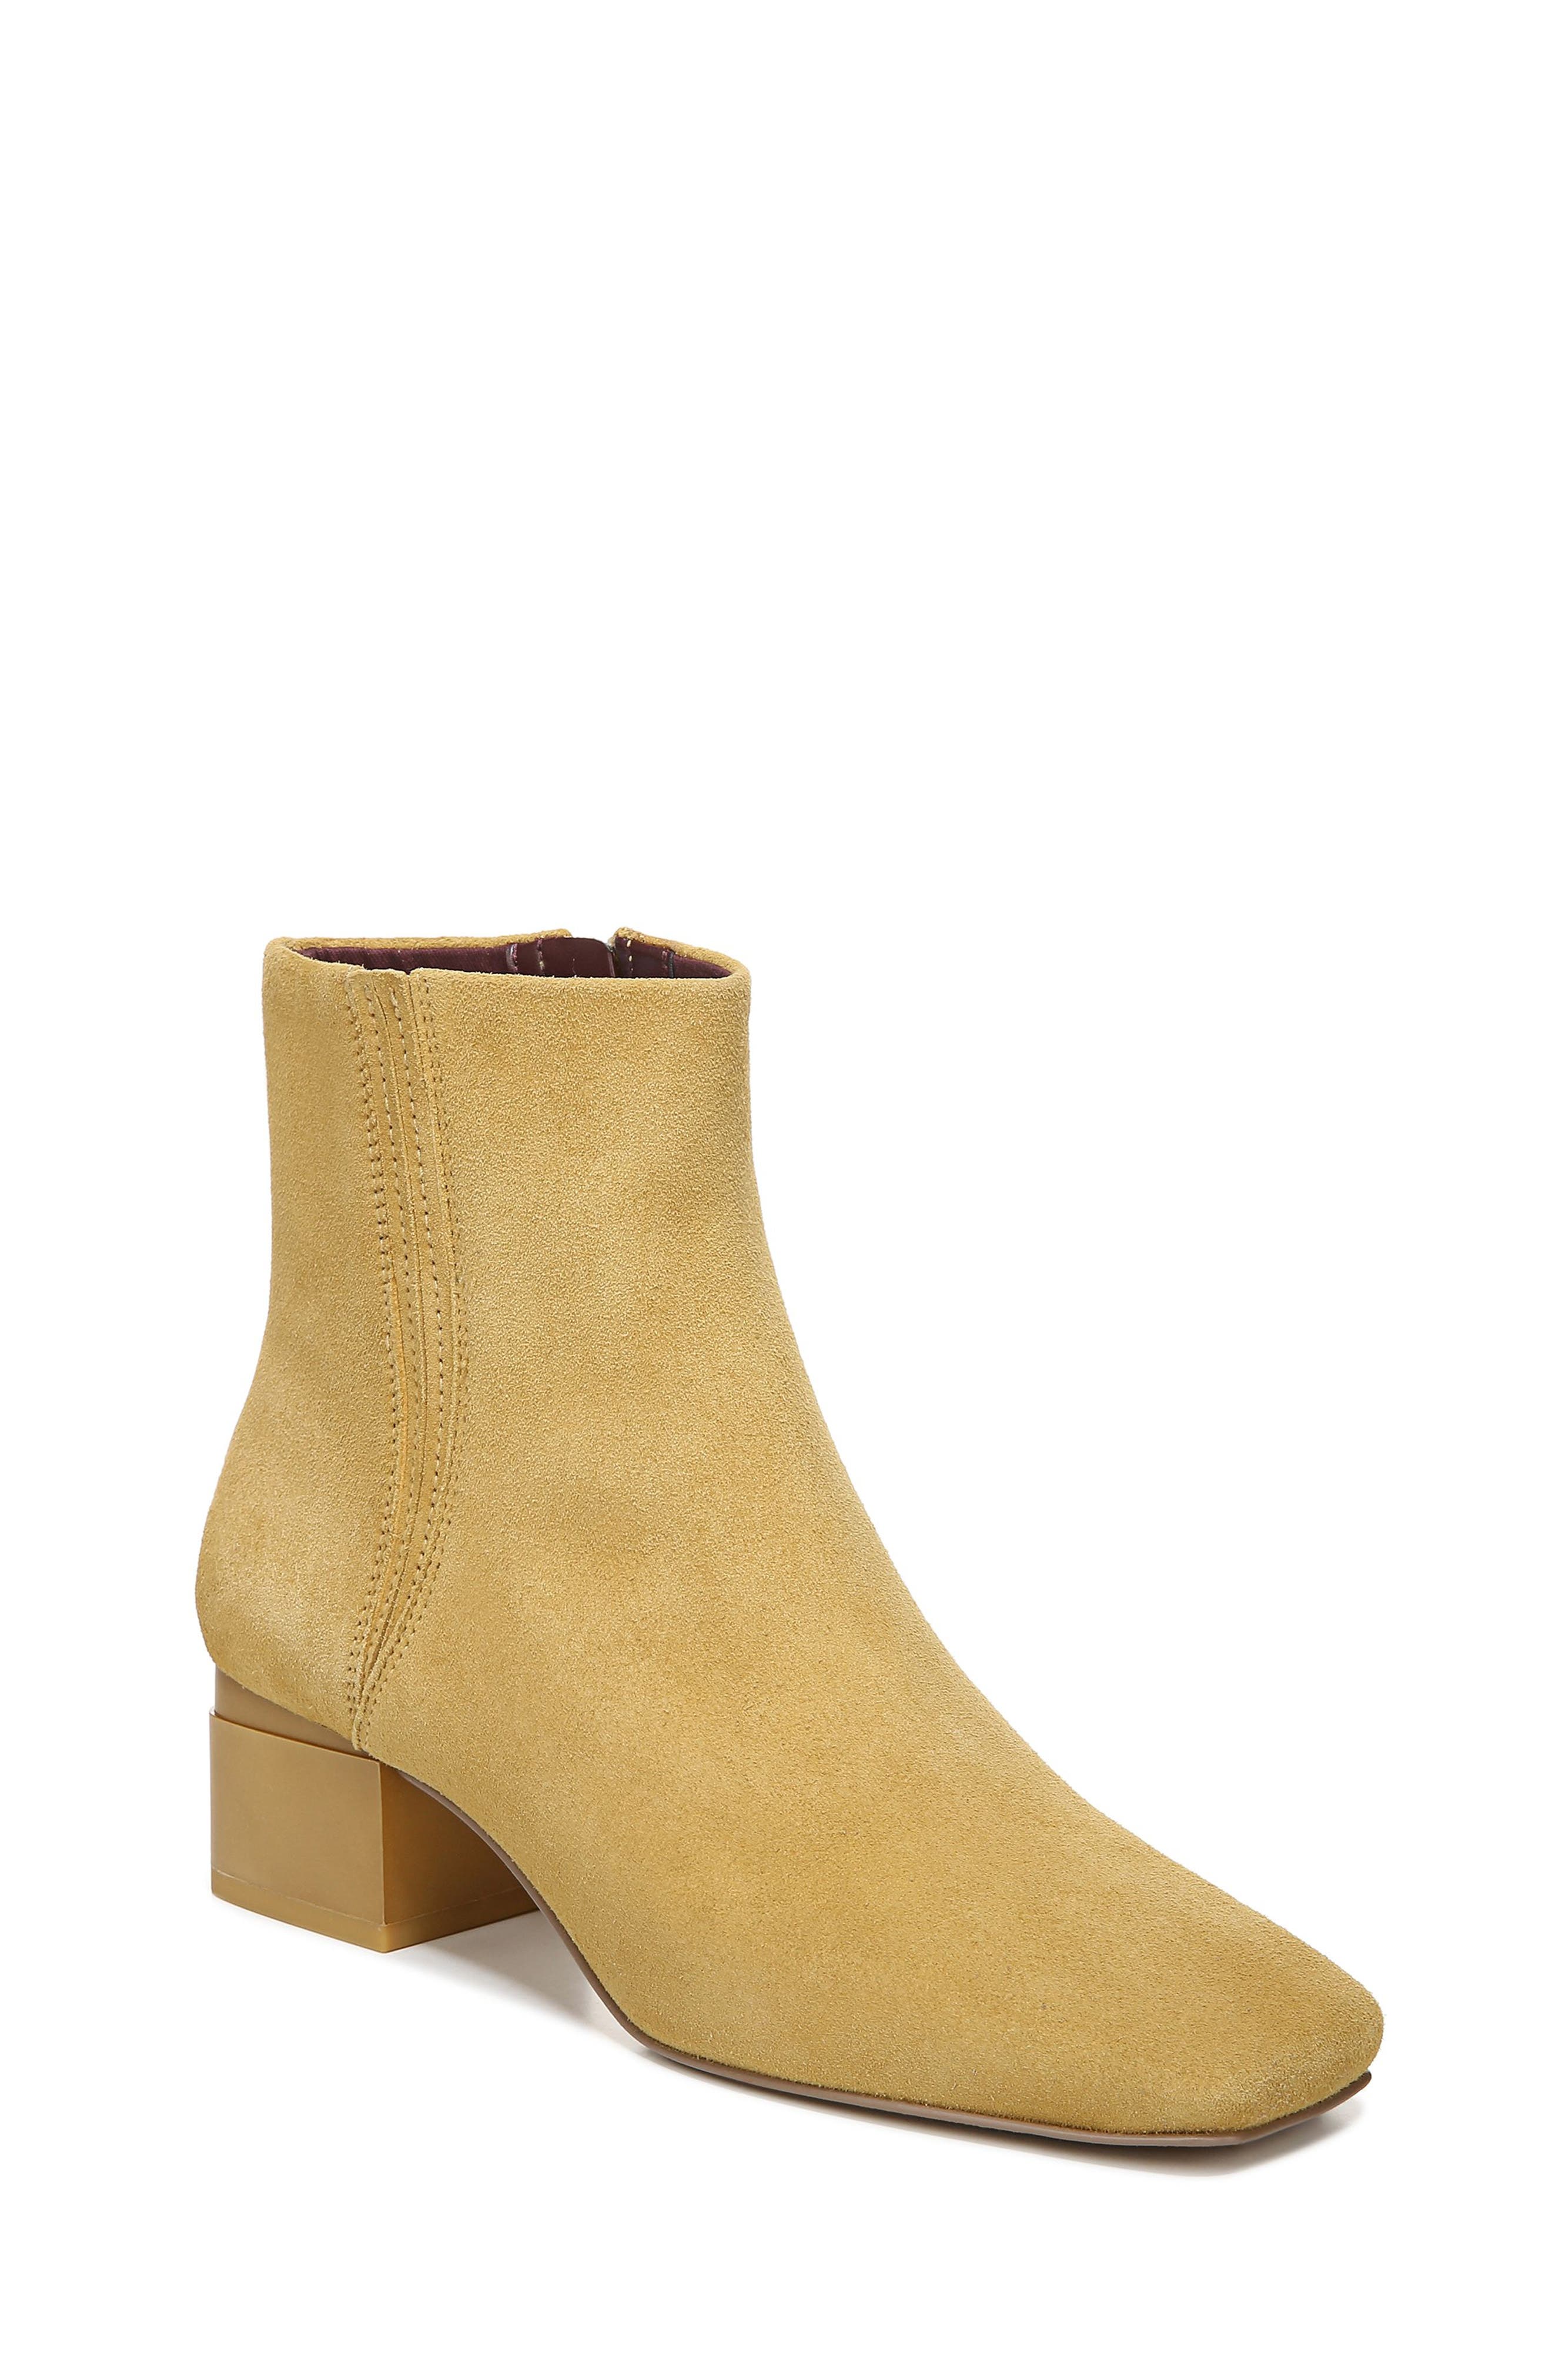 boots mustard color